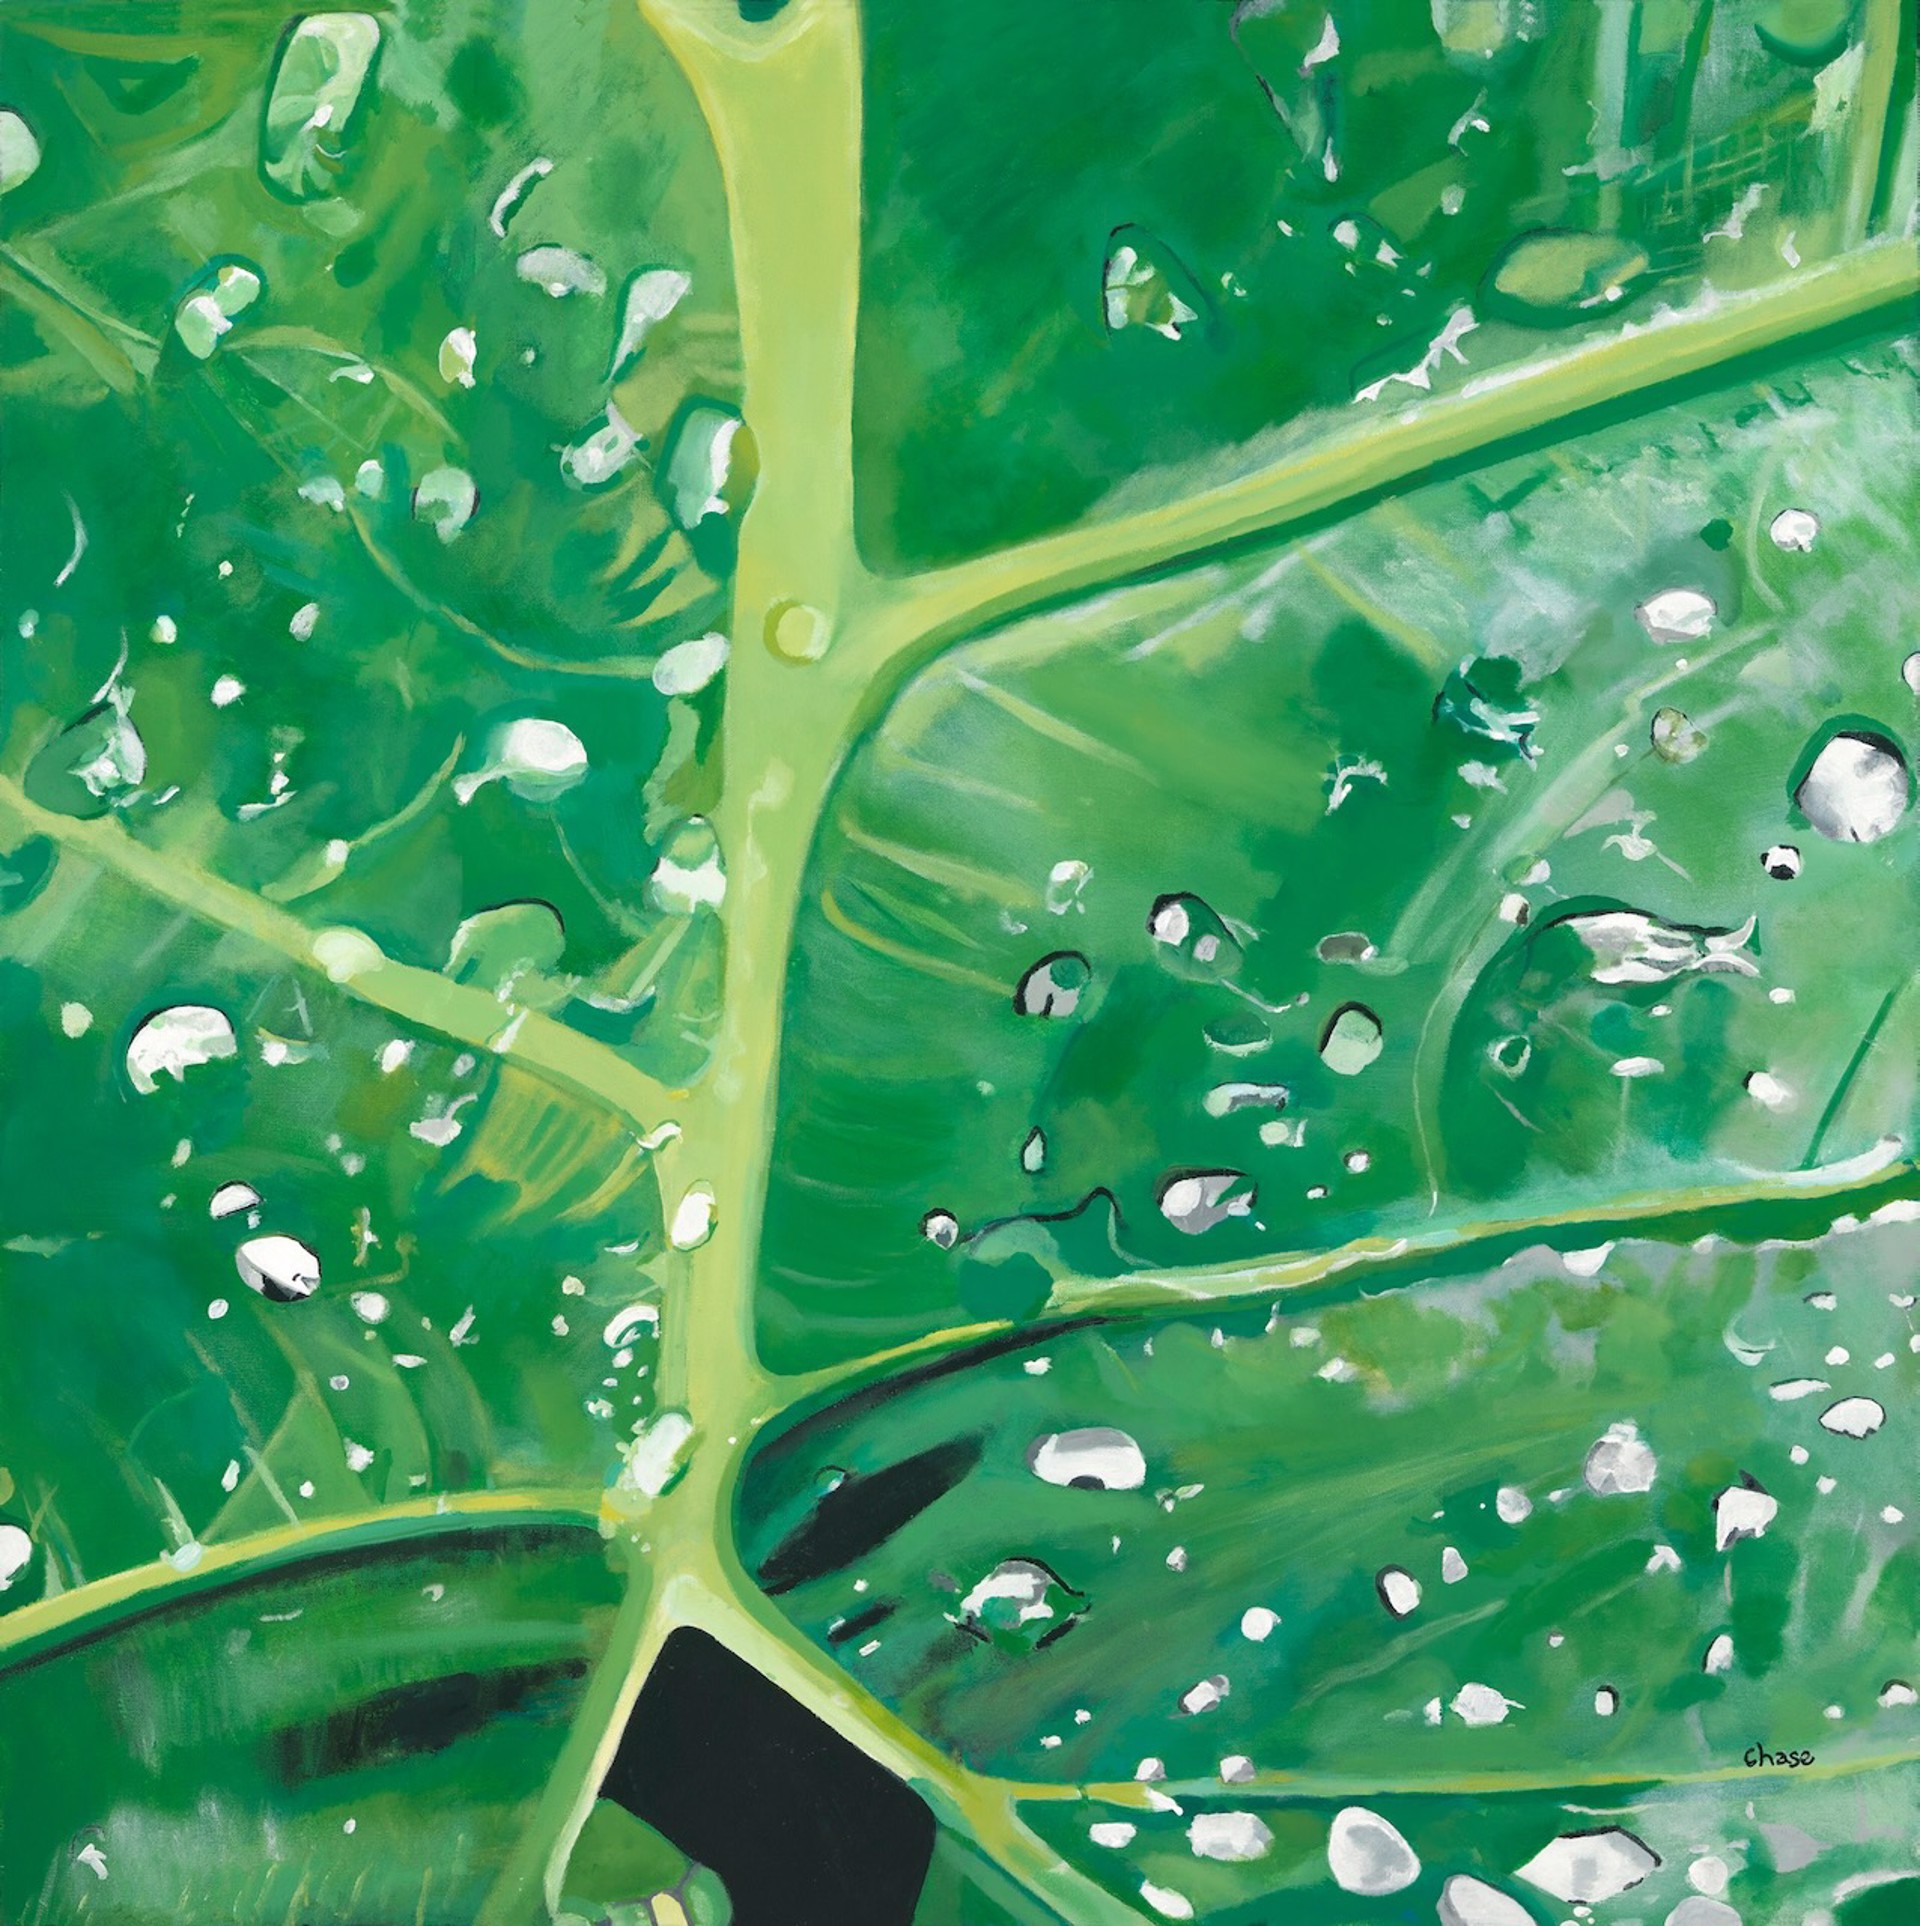 Wet Leaf by Abigail Chase Miller